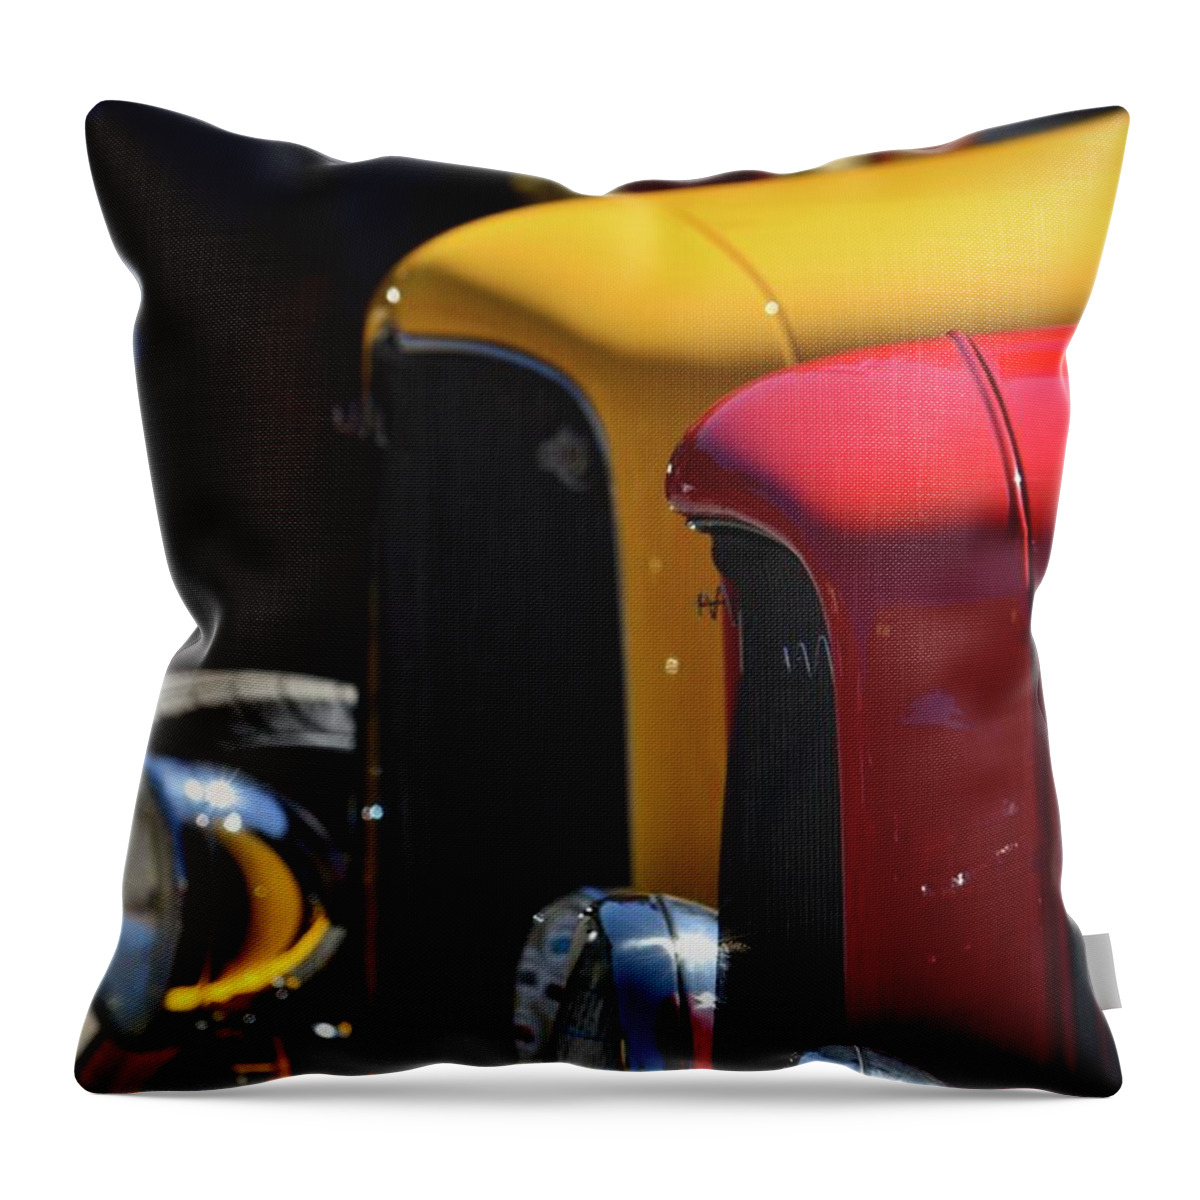  Throw Pillow featuring the photograph Hotrods by Dean Ferreira